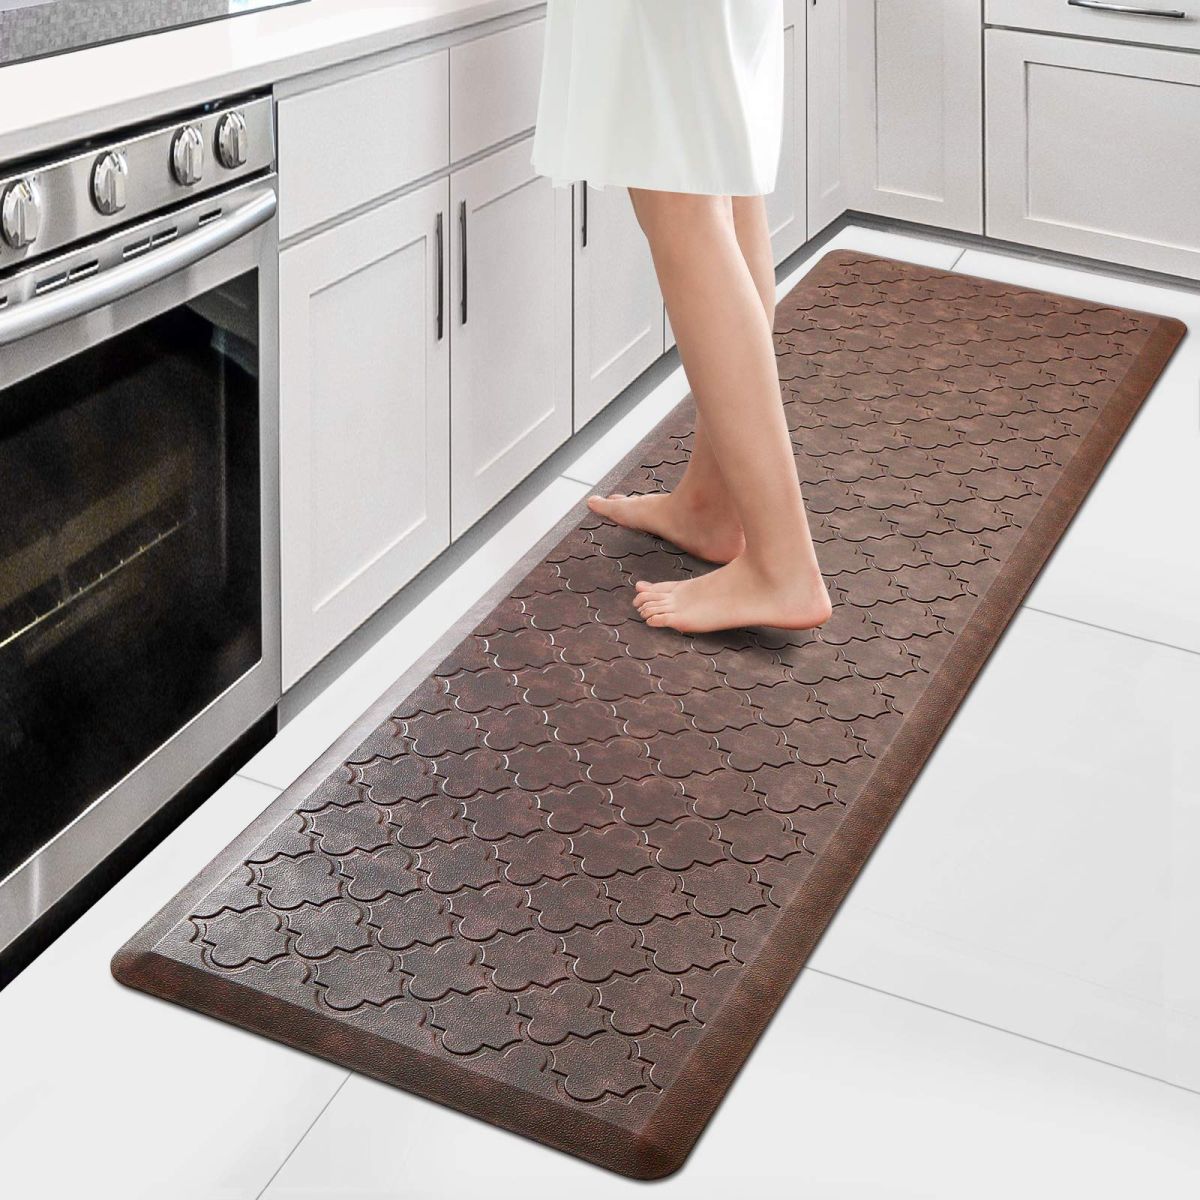 WISELIFE Kitchen Mat Cushioned Anti Fatigue Floor Mat,